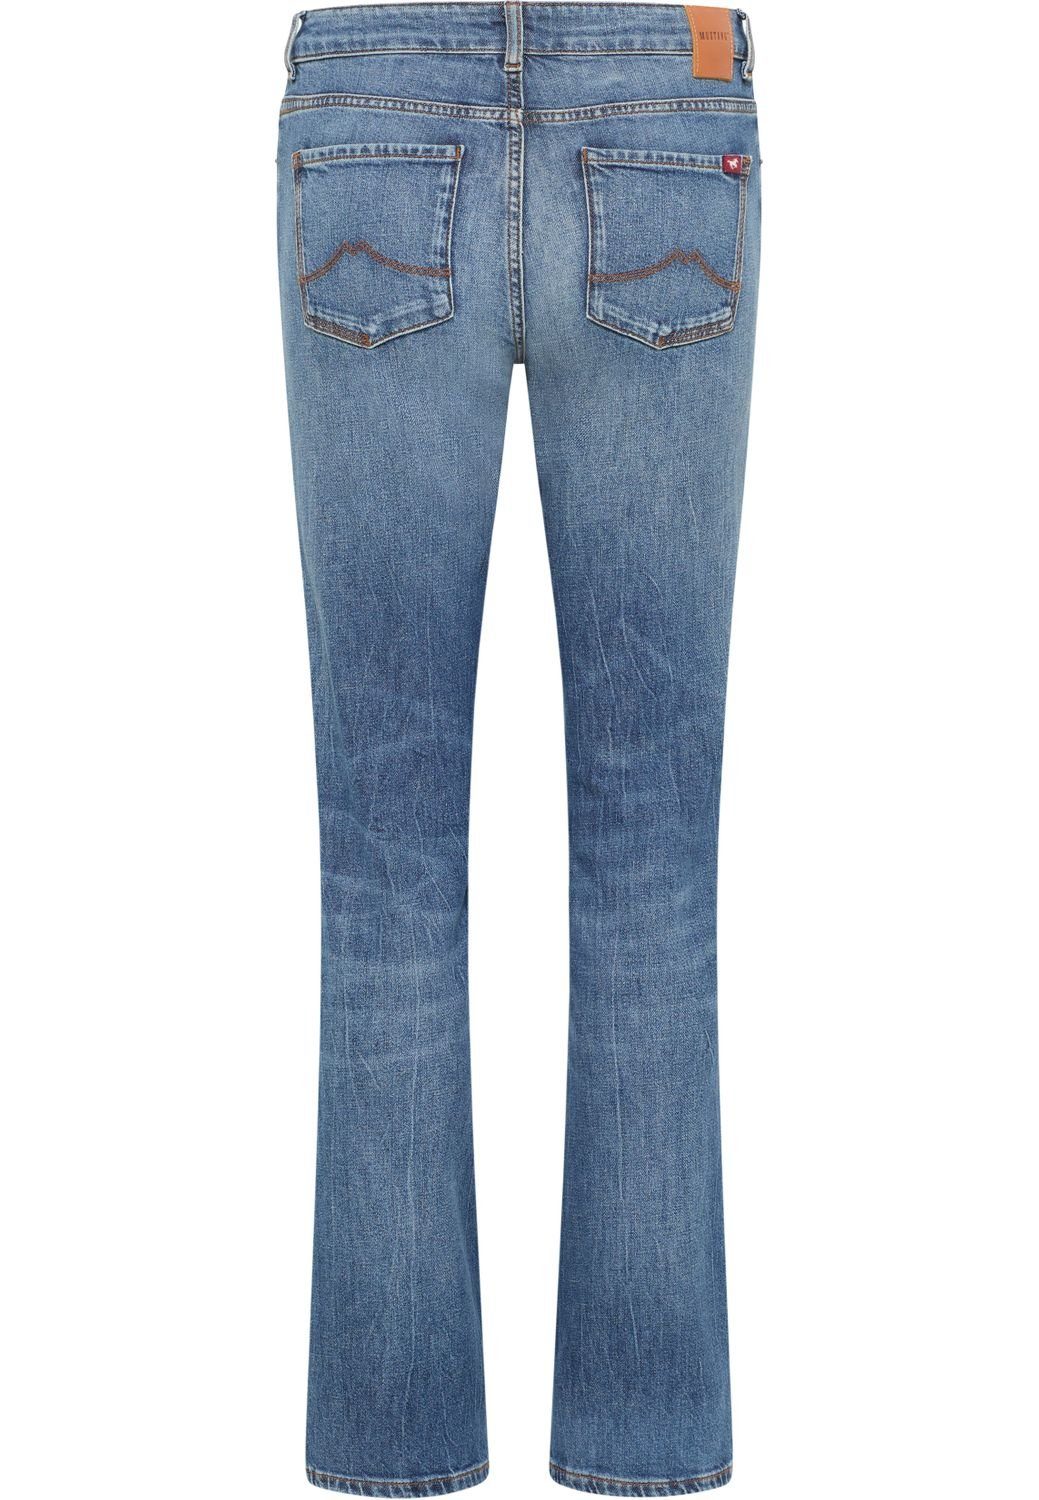 MUSTANG Relax-fit-Jeans CROSBY Stretch mit